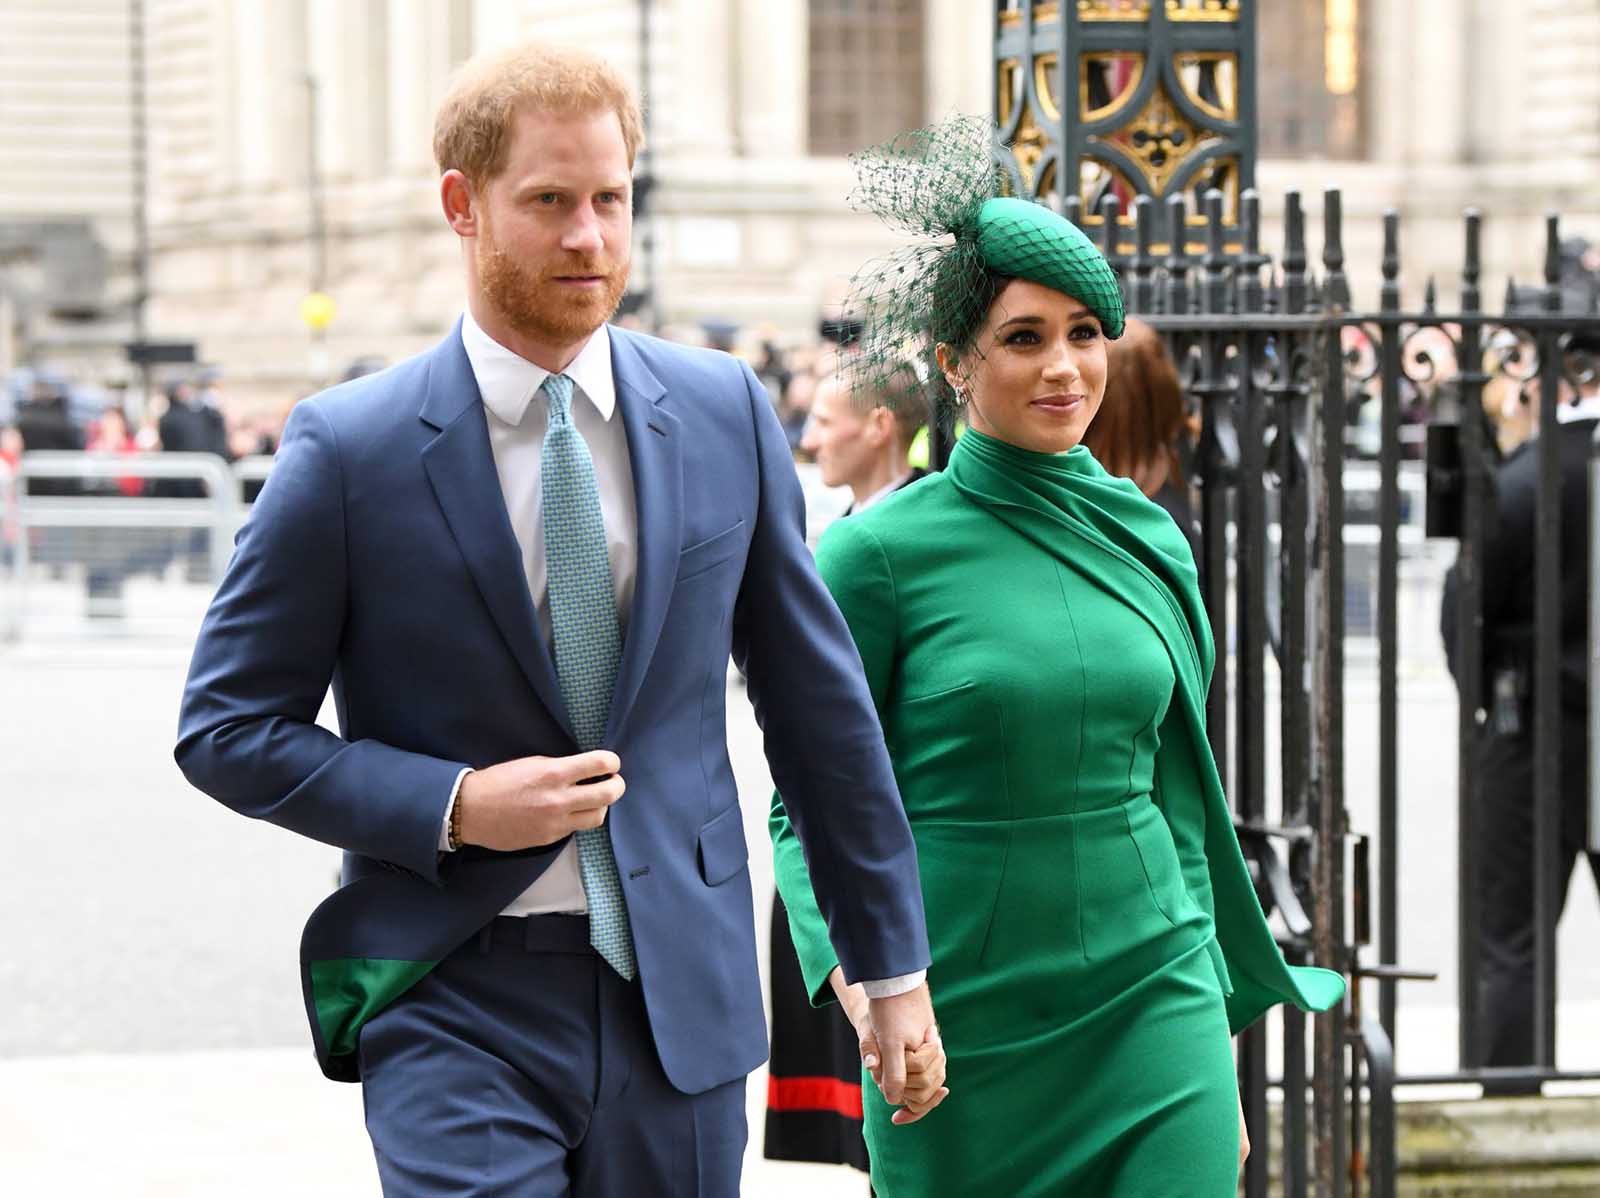 'Harry and Meghan: The Revelations' is the quintessential doc for any fan of the British Royal Family. Here's why you need to watch when it releases.